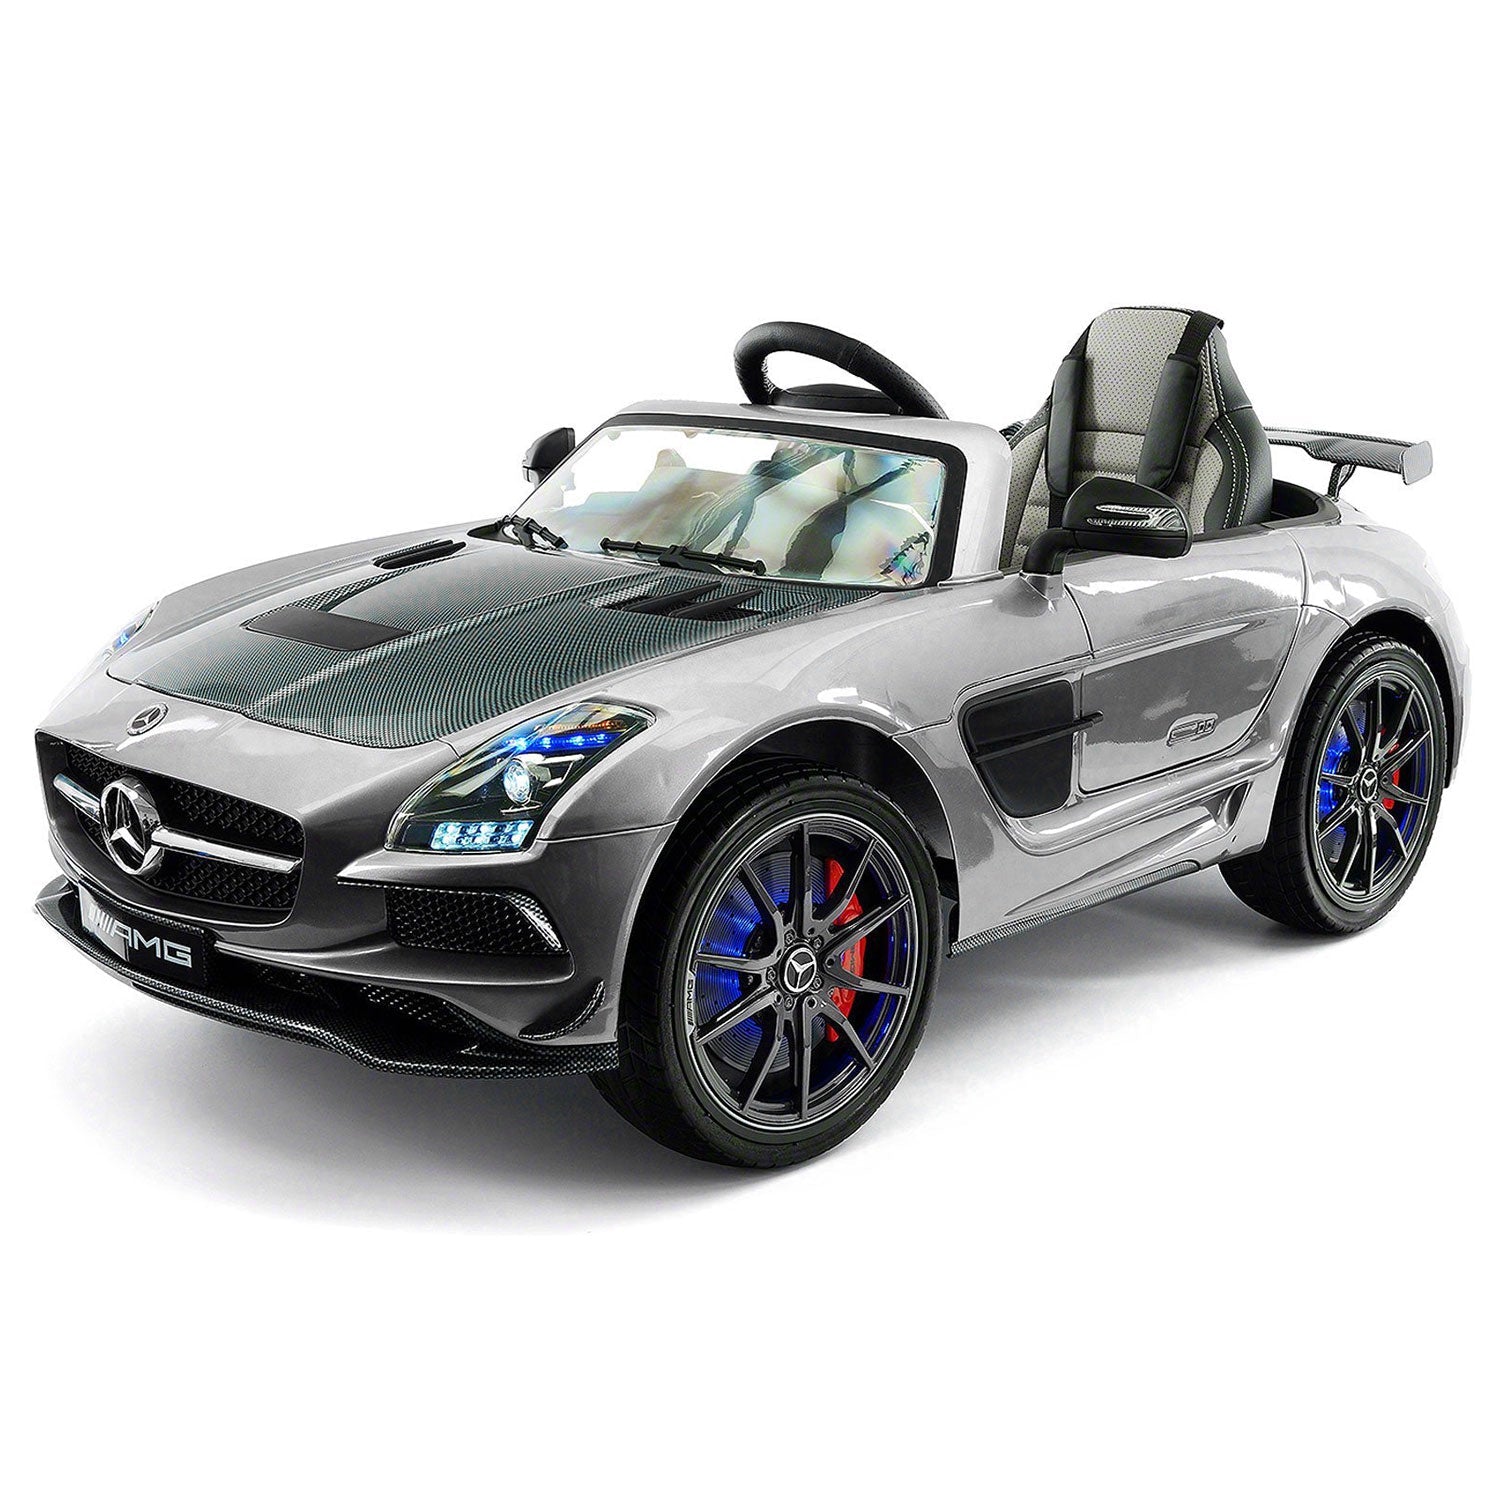 Mercedes Sls Amg Final Edition 12v Kids Ride-on Car With Parental Remote | Gray Metallic